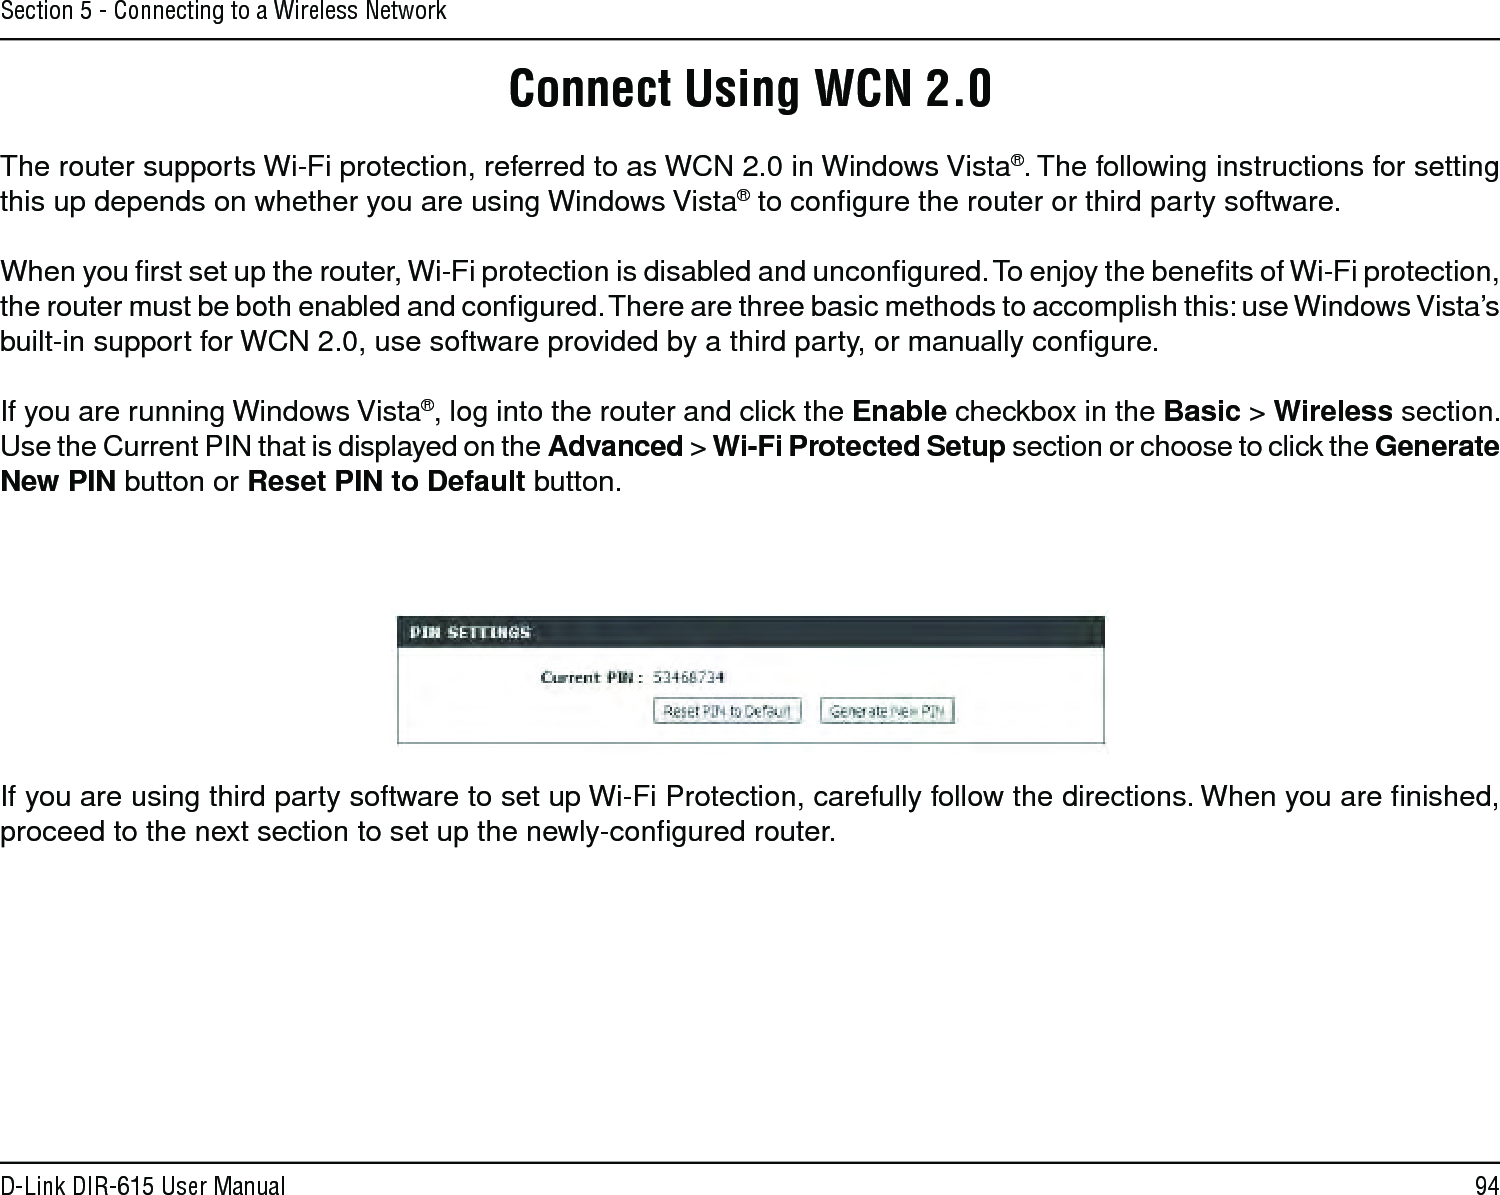 94D-Link DIR-615 User ManualSection 5 - Connecting to a Wireless NetworkConnect Using WCN 2.0The router supports Wi-Fi protection, referred to as WCN 2.0 in Windows Vista®. The following instructions for setting this up depends on whether you are using Windows Vista® to conﬁgure the router or third party software.        When you ﬁrst set up the router, Wi-Fi protection is disabled and unconﬁgured. To enjoy the beneﬁts of Wi-Fi protection, the router must be both enabled and conﬁgured. There are three basic methods to accomplish this: use Windows Vista’s built-in support for WCN 2.0, use software provided by a third party, or manually conﬁgure. If you are running Windows Vista®, log into the router and click the Enable checkbox in the Basic &gt; Wireless section. Use the Current PIN that is displayed on the Advanced &gt; Wi-Fi Protected Setup section or choose to click the Generate New PIN button or Reset PIN to Default button. If you are using third party software to set up Wi-Fi Protection, carefully follow the directions. When you are ﬁnished, proceed to the next section to set up the newly-conﬁgured router. 